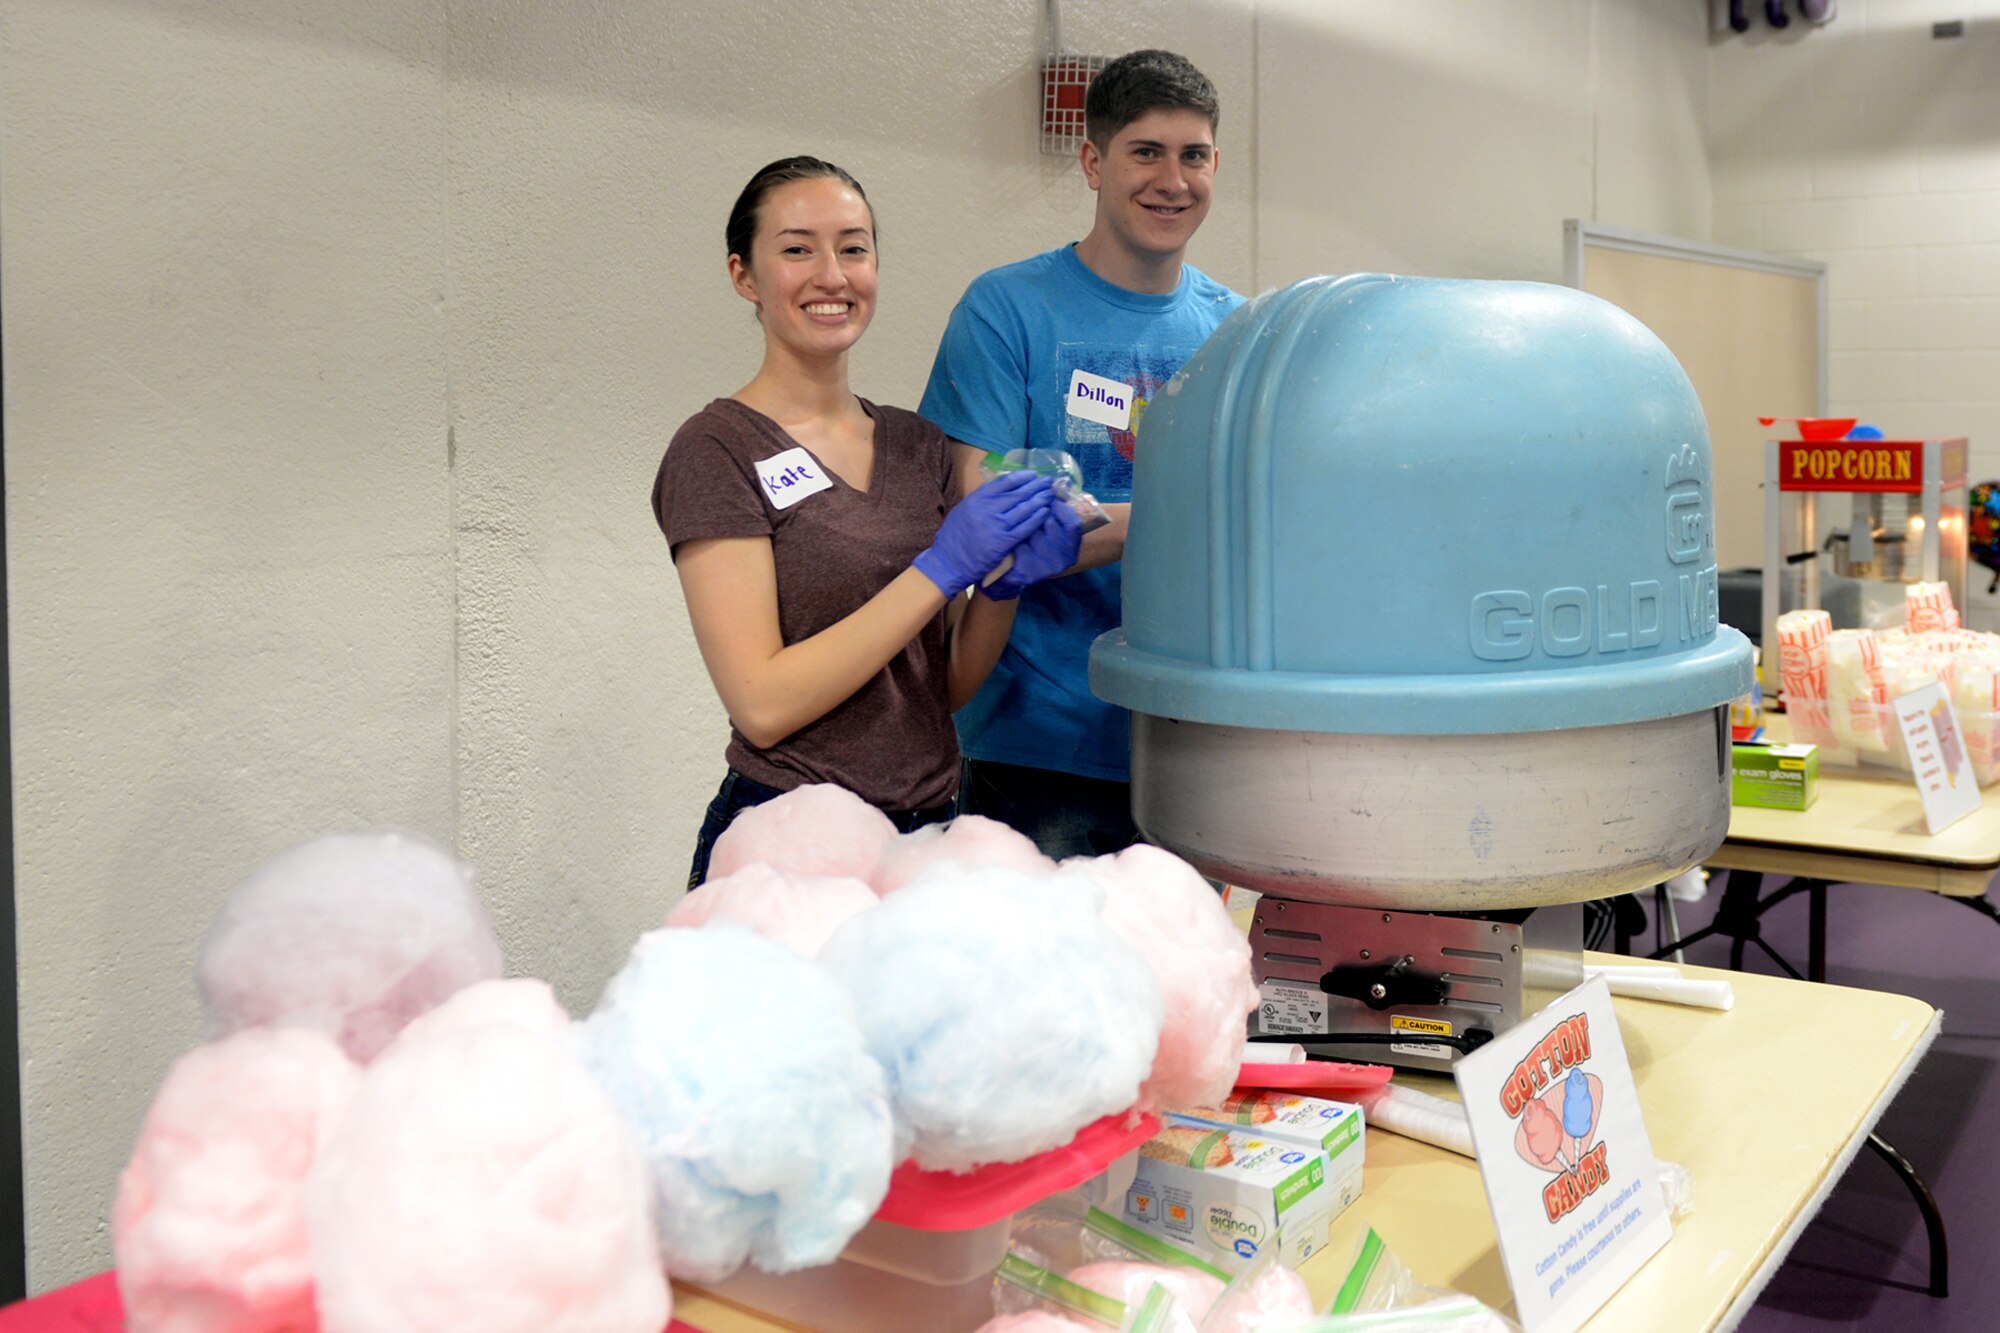 Airman 1st Class Kate Gatsios, 55th Medical Group, and Airman 1st Class Dillon Kline, 55th Logistics Readiness Squadron, make cotton candy April 9, 2019, at the Bellevue Lied Center, Nebraska. The center was used for the 6th Annual Special Needs Fair. (U.S. Air Force photo by Kendra Williams)